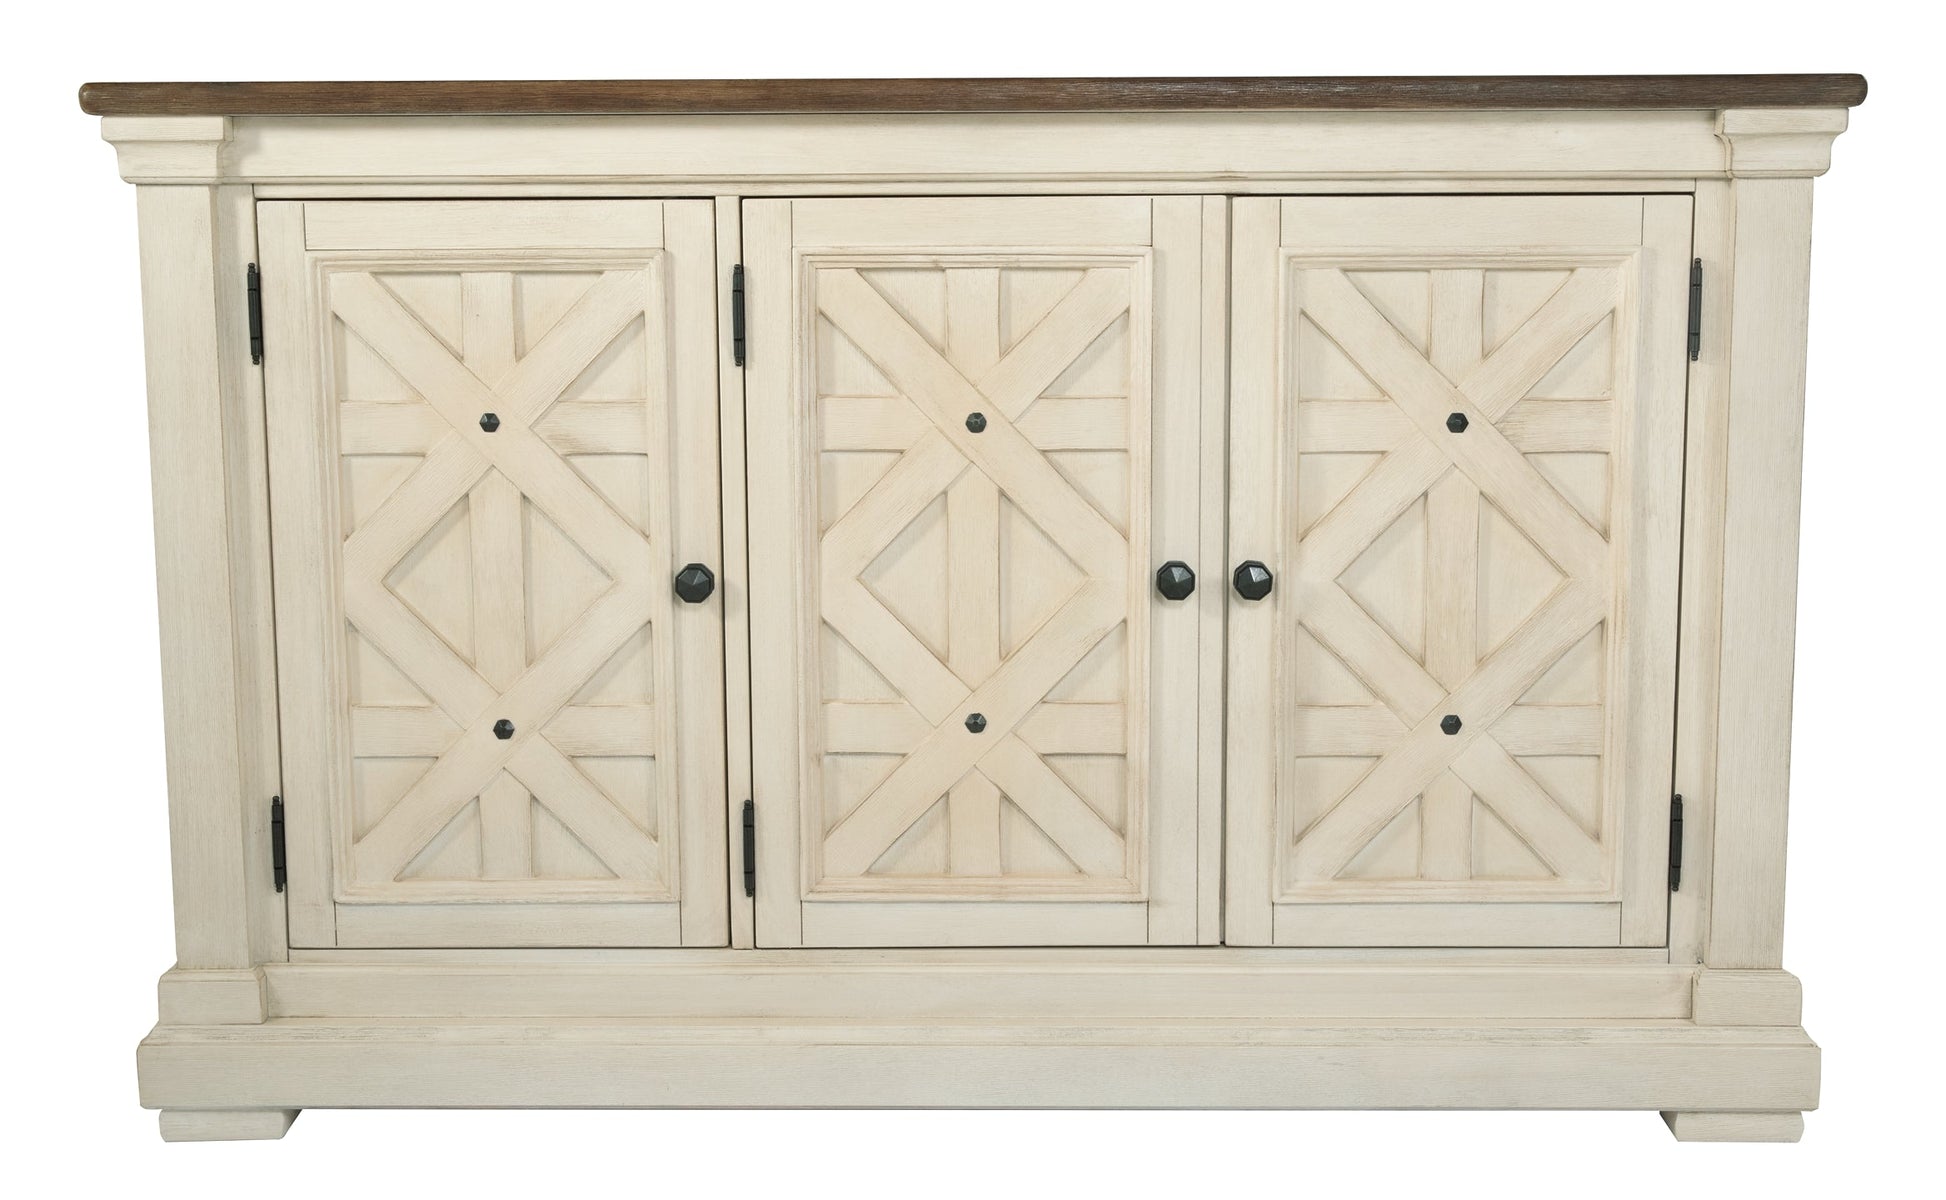 Bolanburg Dining Room Server at Towne & Country Furniture (AL) furniture, home furniture, home decor, sofa, bedding